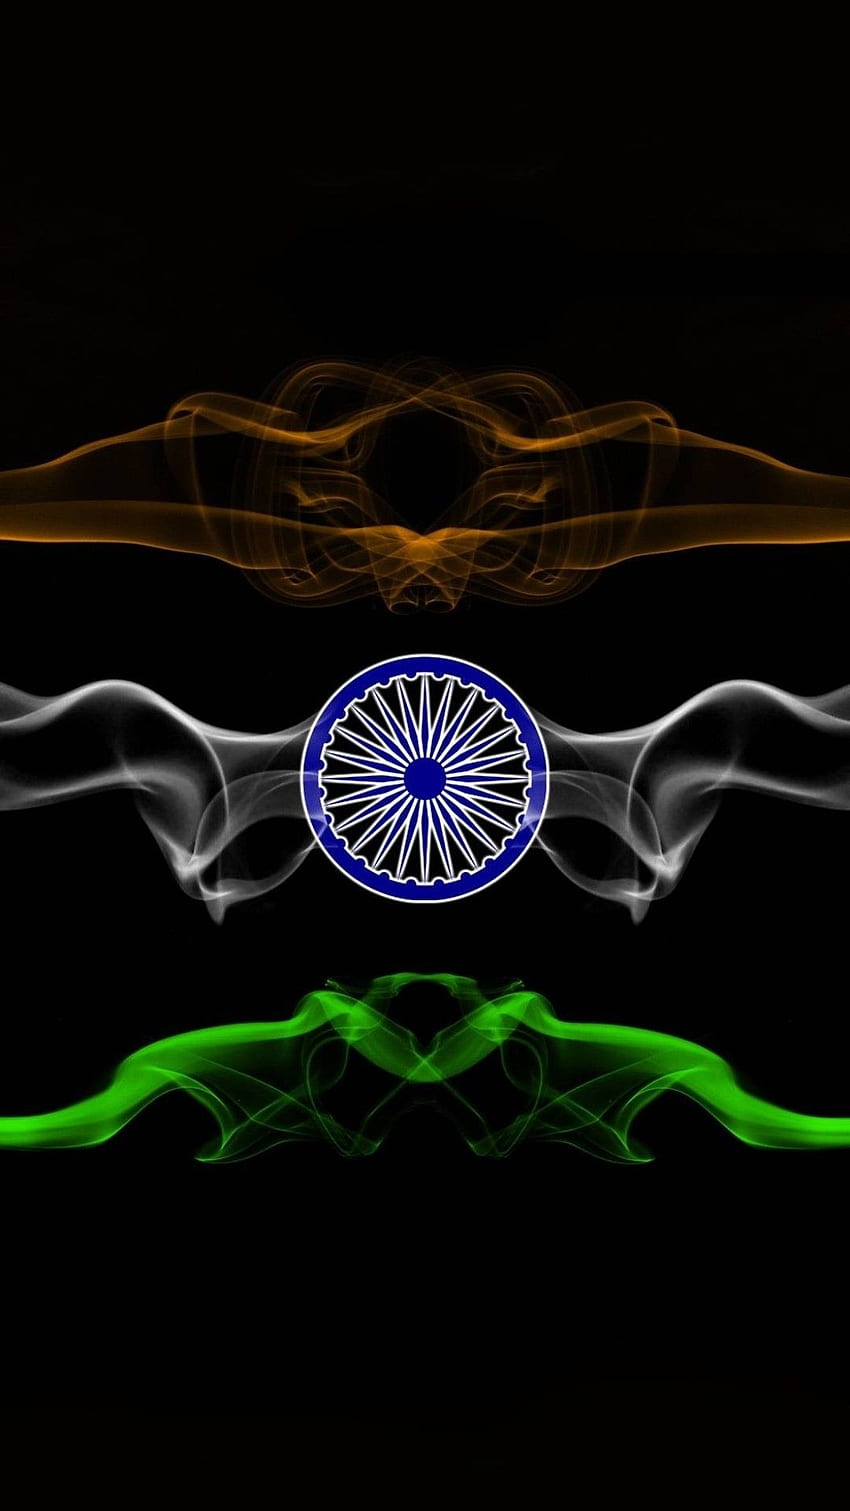 Aniket Kshatriya on LinkedIn: Happy Independence Day! Today is a special  day for all Indians, as we…